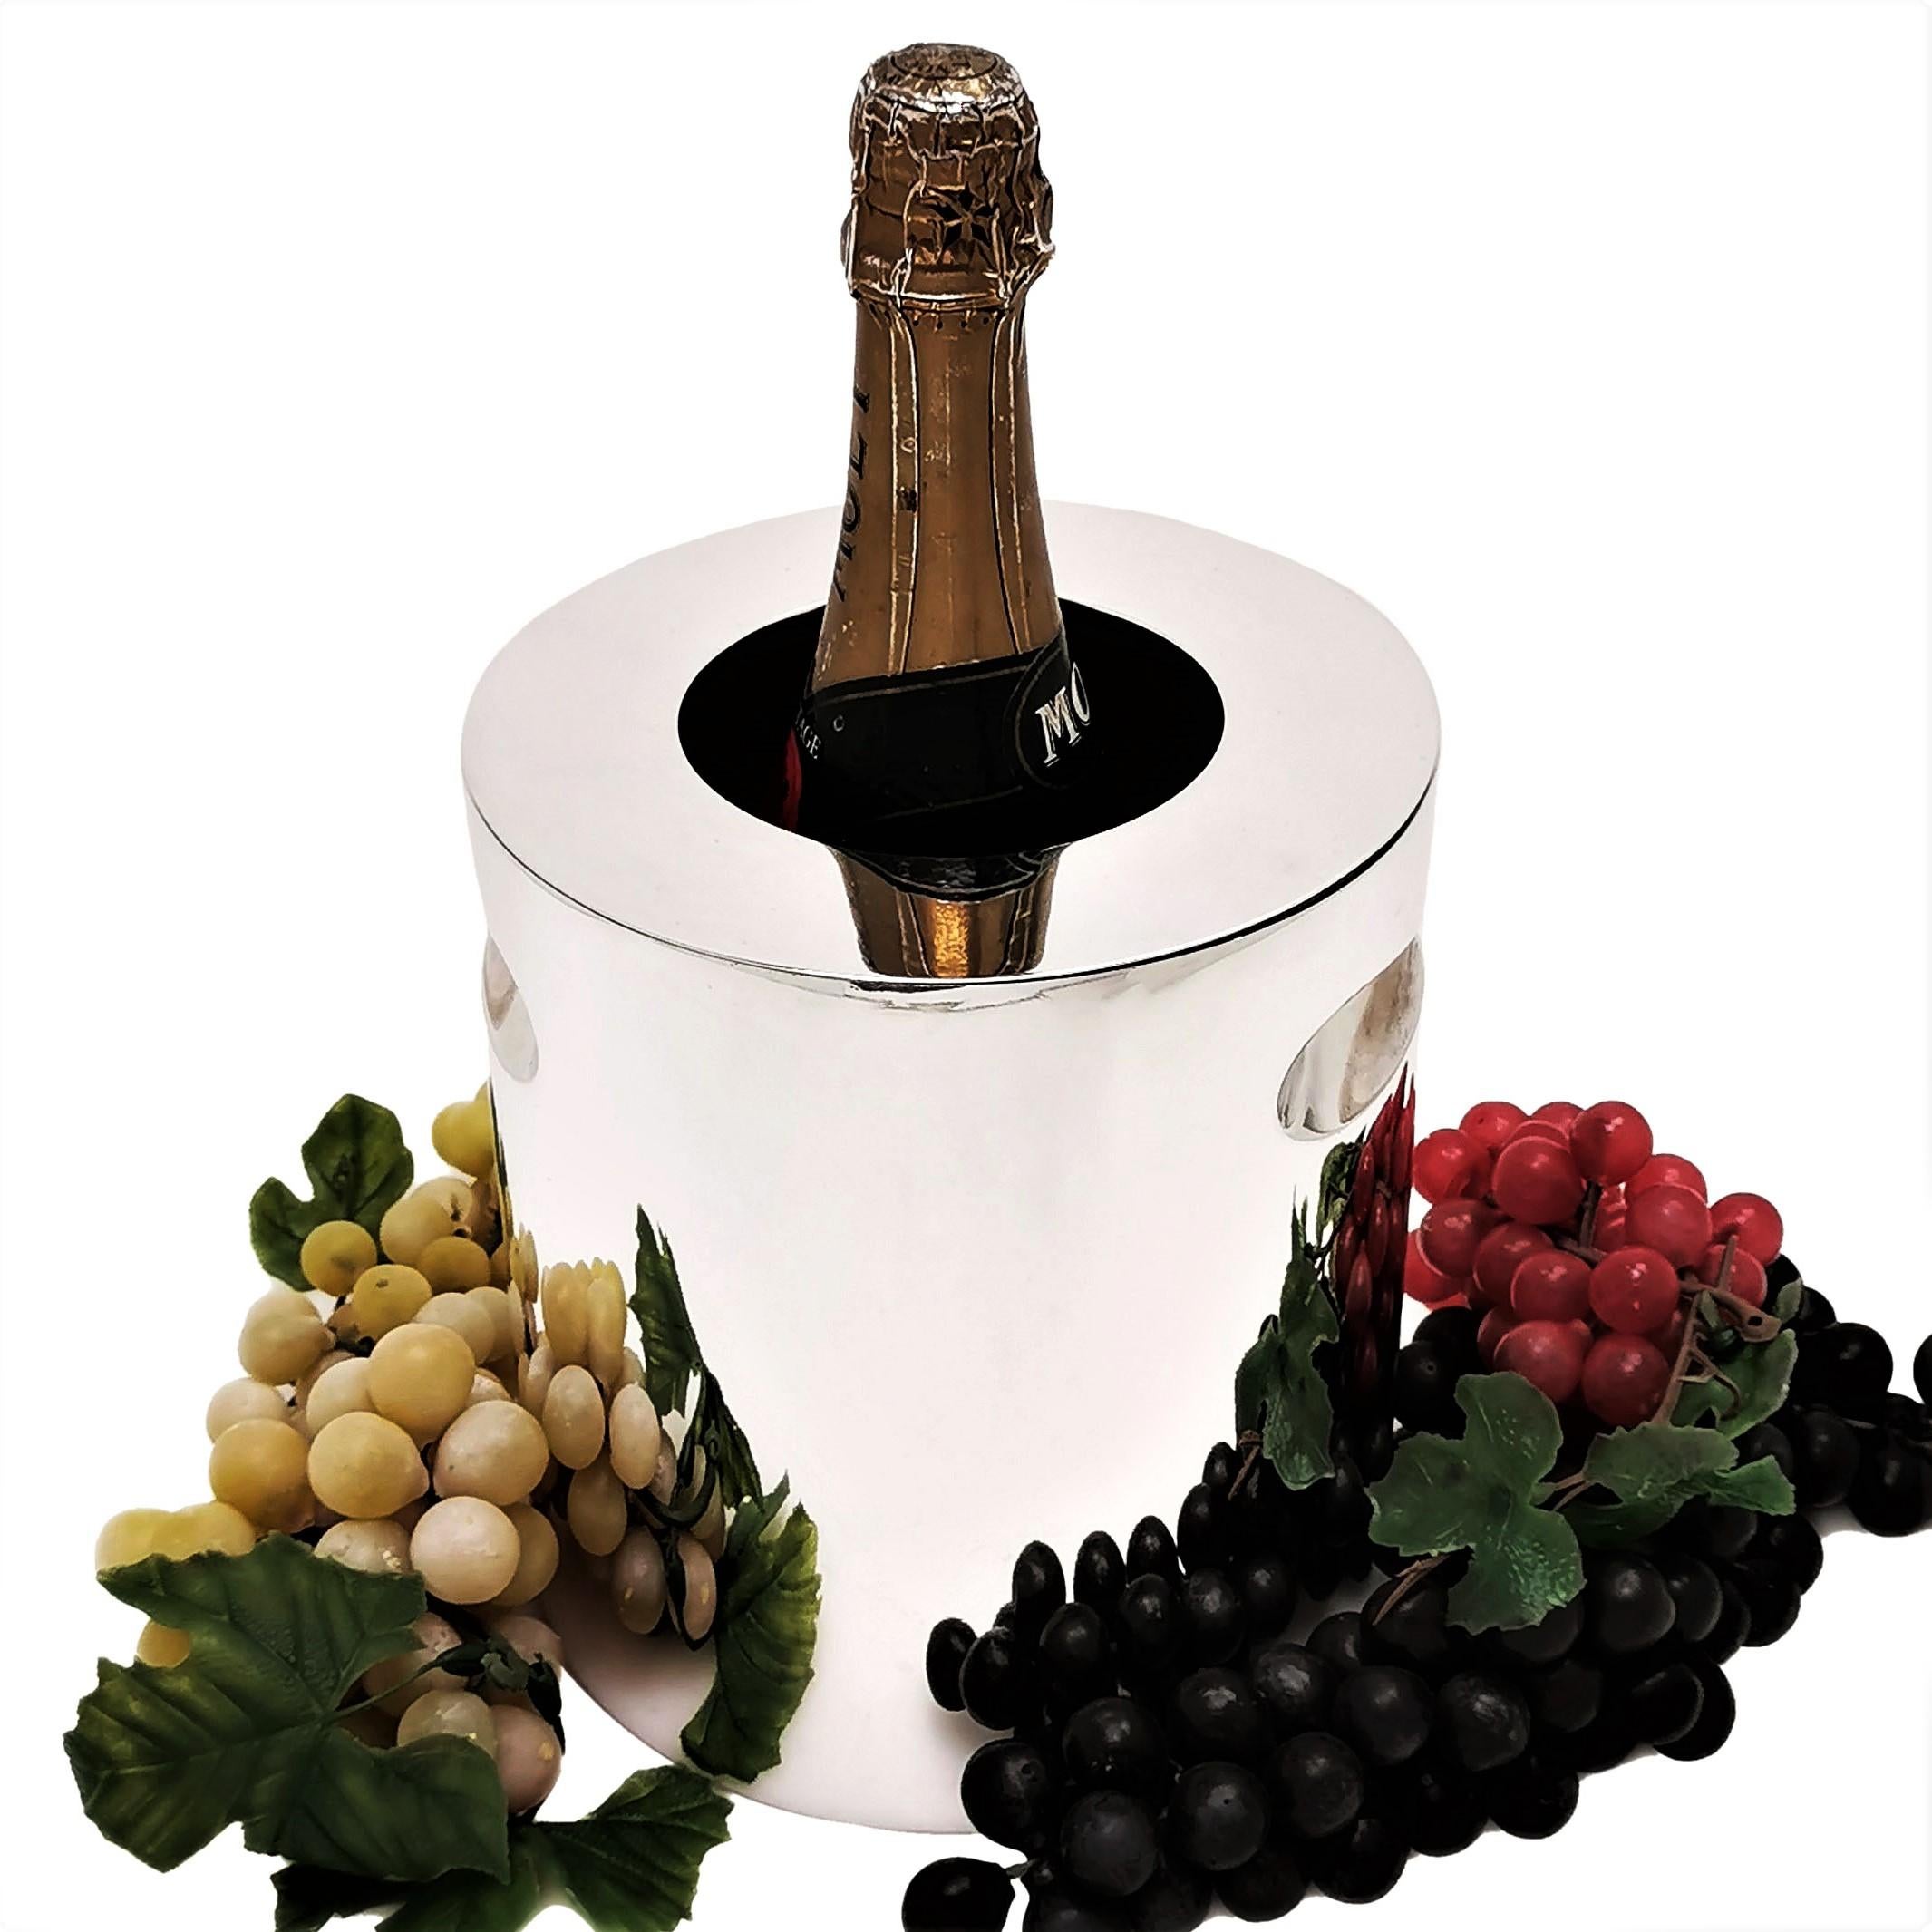 An elegant modernist mid century Italian solid silver champagne cooler with a removable fitted lid. The Wine Cooler has an understated straight sided design enhanced by simple everted handles in two sides. The simple design is elevated by the highly